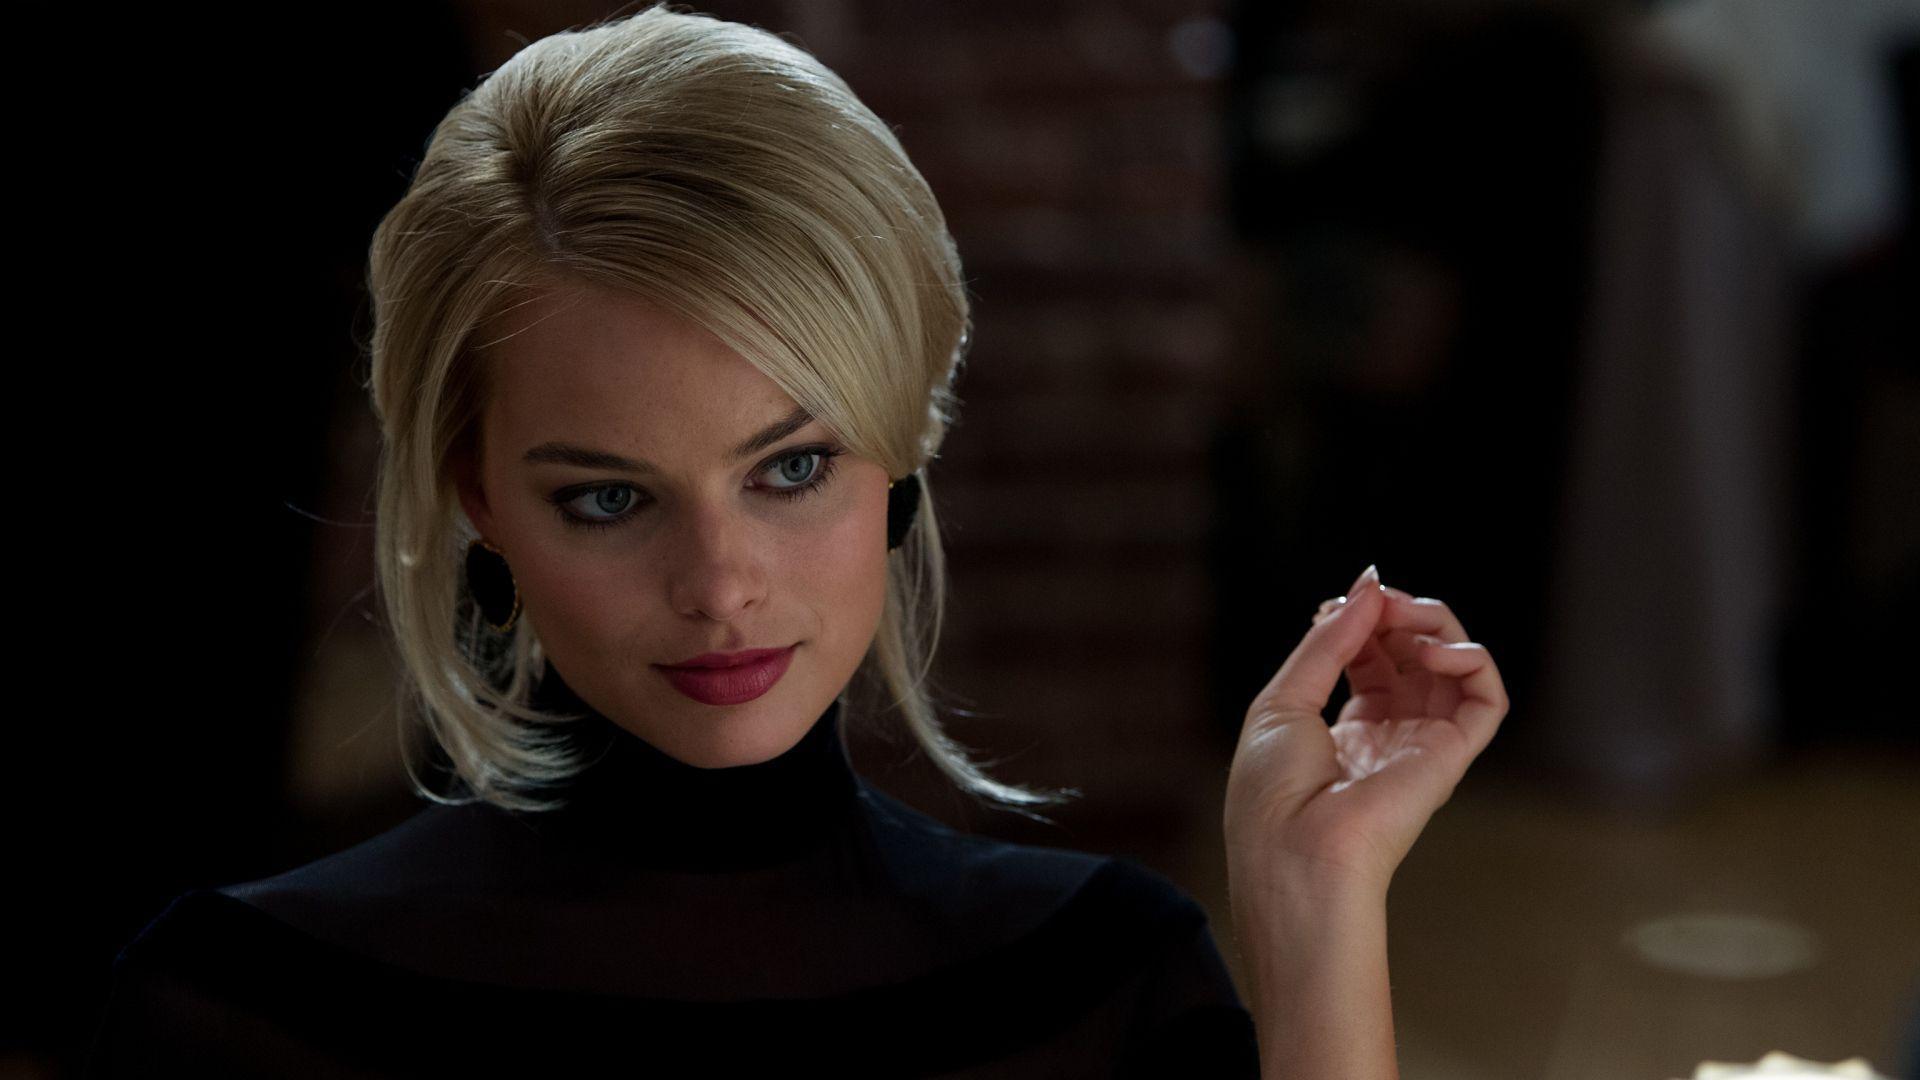 Margot Robbie Wallpapers High Resolution and Quality Download